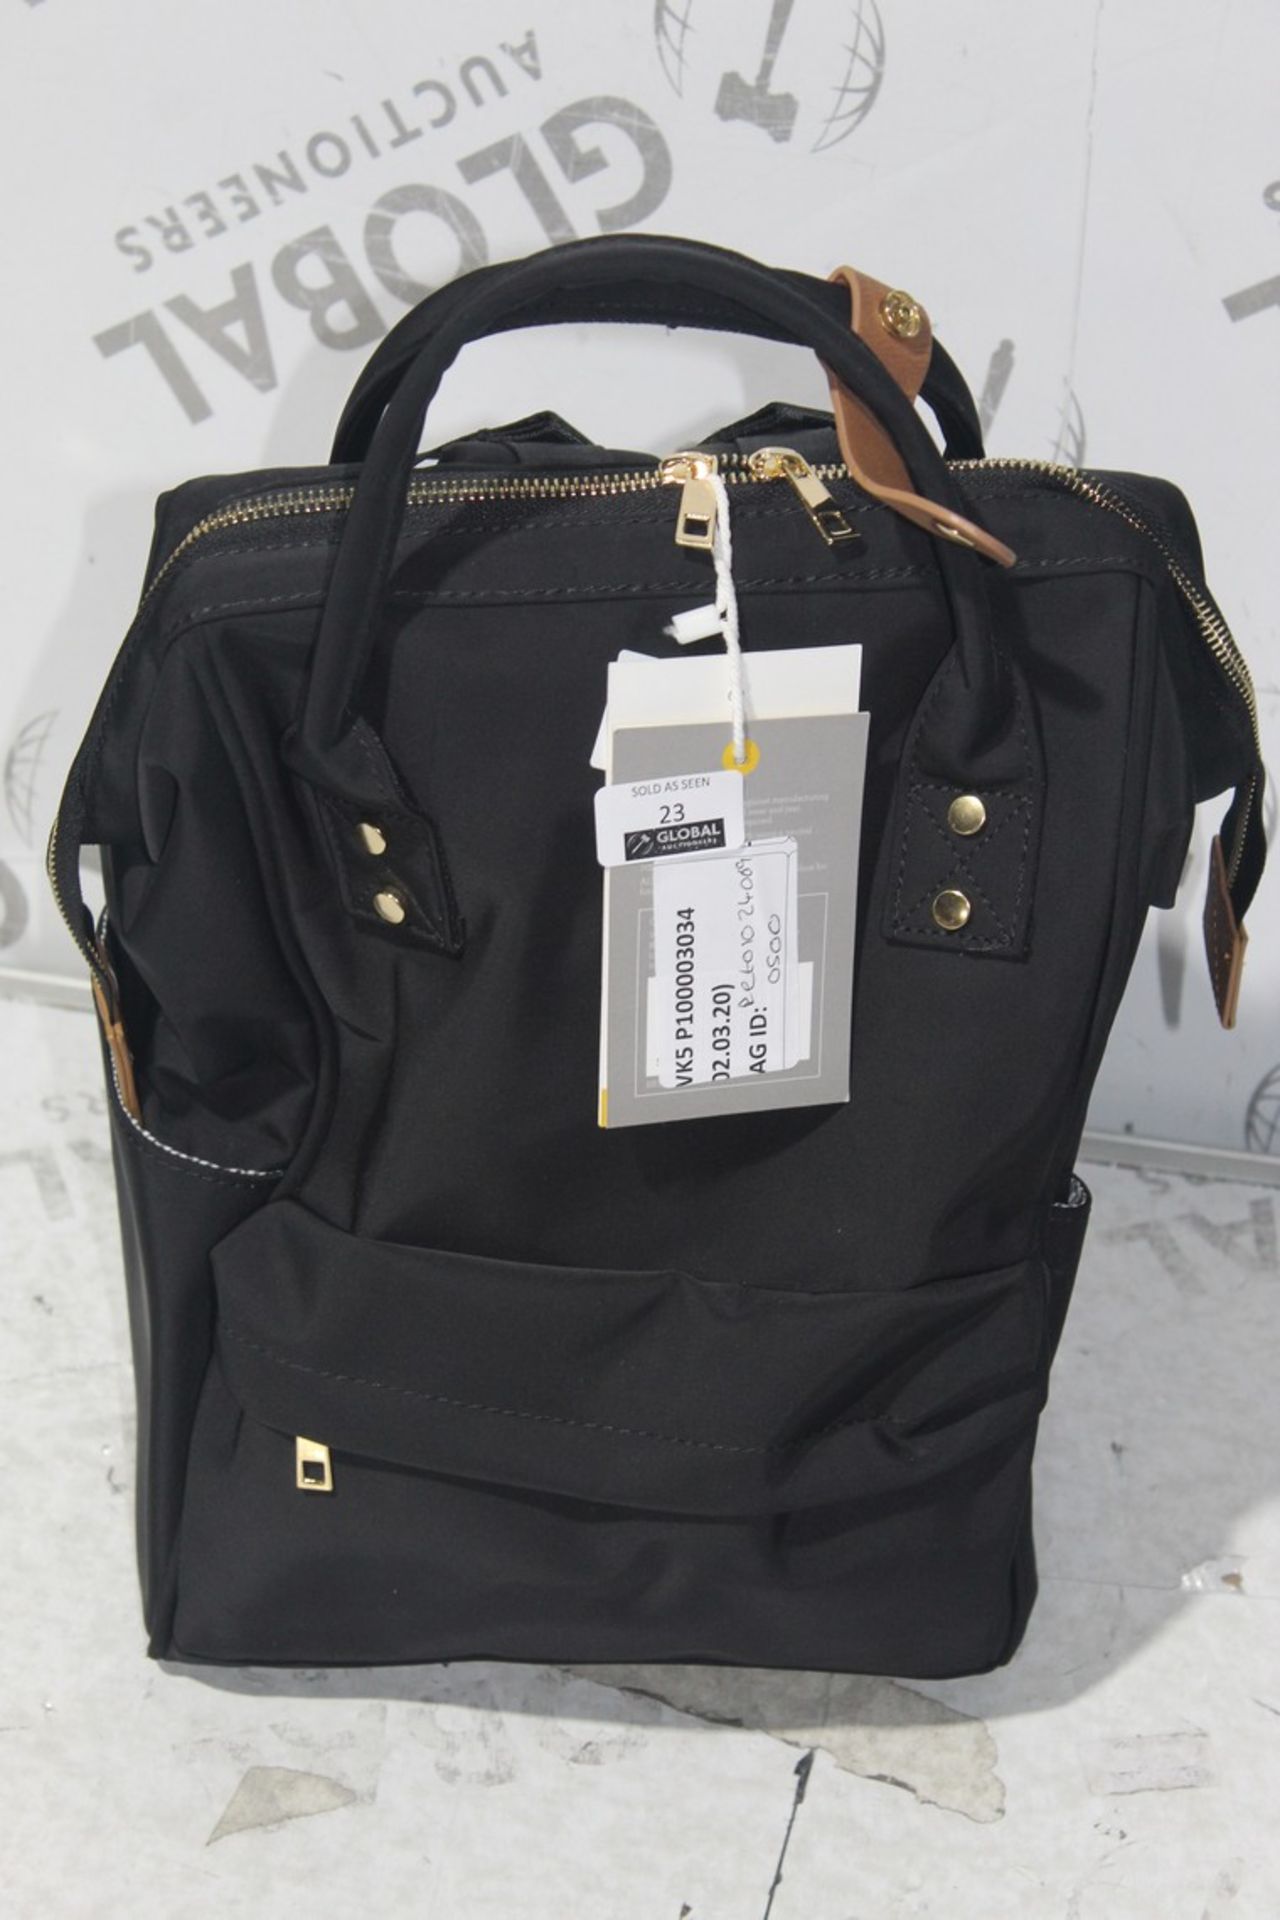 Bababing Black Children's Changing Bag, RRP£50 (4919123) (Public Viewings And Appraisals Available)